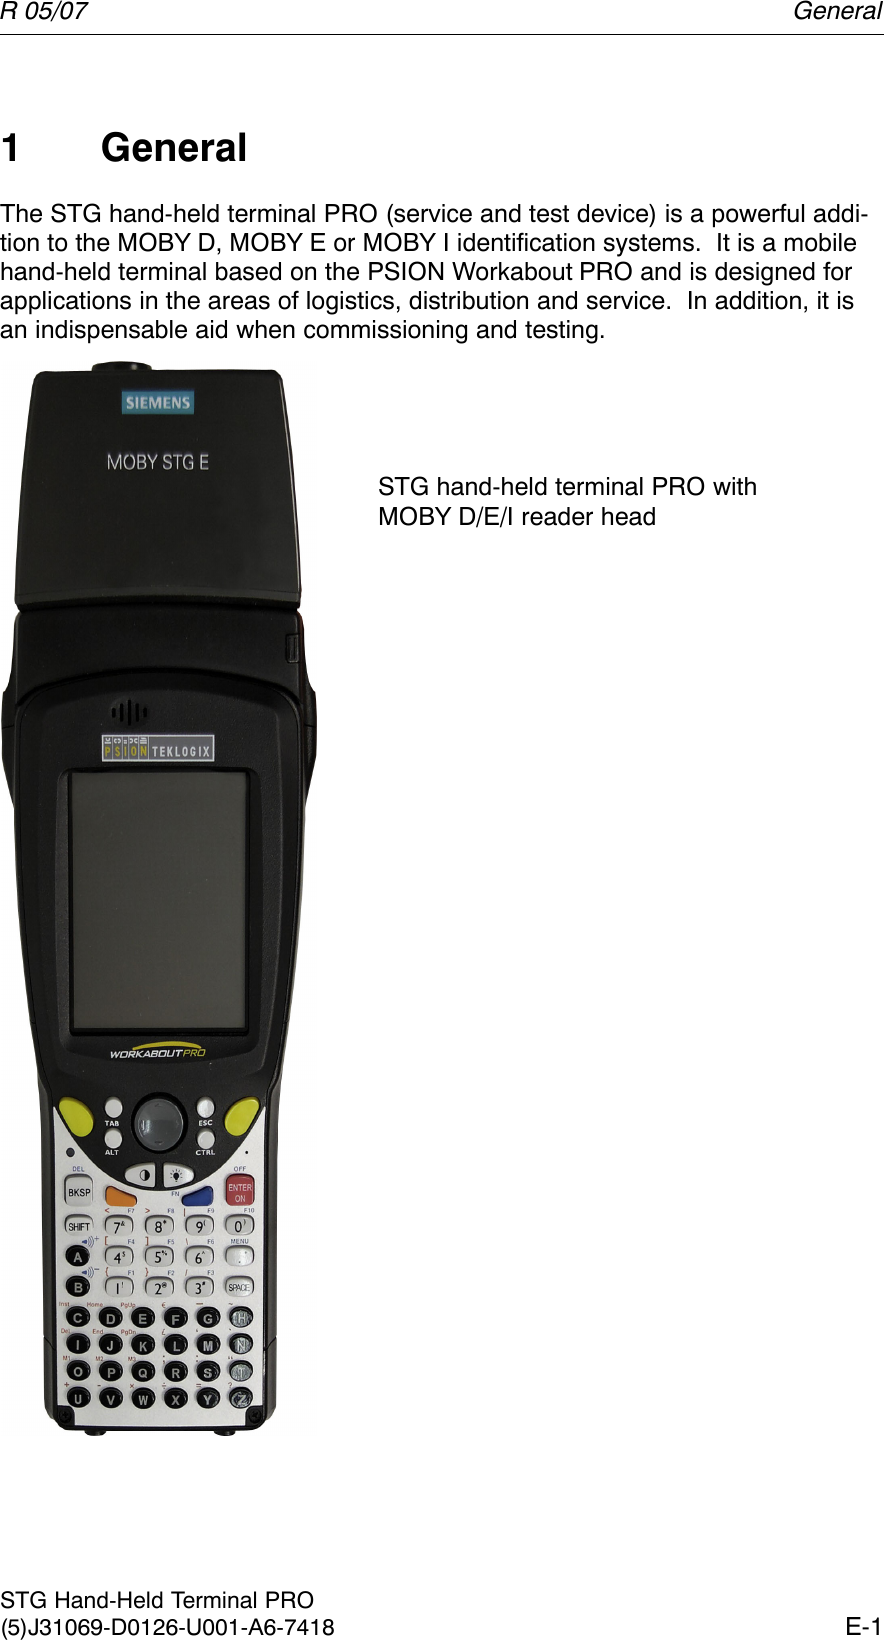 R 05/07E-1STG Hand-Held Terminal PRO(5)J31069-D0126-U001-A6-74181 GeneralThe STG hand-held terminal PRO (service and test device) is a powerful addi-tion to the MOBY D, MOBY E or MOBY I identification systems.  It is a mobilehand-held terminal based on the PSION Workabout PRO and is designed forapplications in the areas of logistics, distribution and service.  In addition, it isan indispensable aid when commissioning and testing.STG hand-held terminal PRO withMOBY D/E/I reader headGeneral